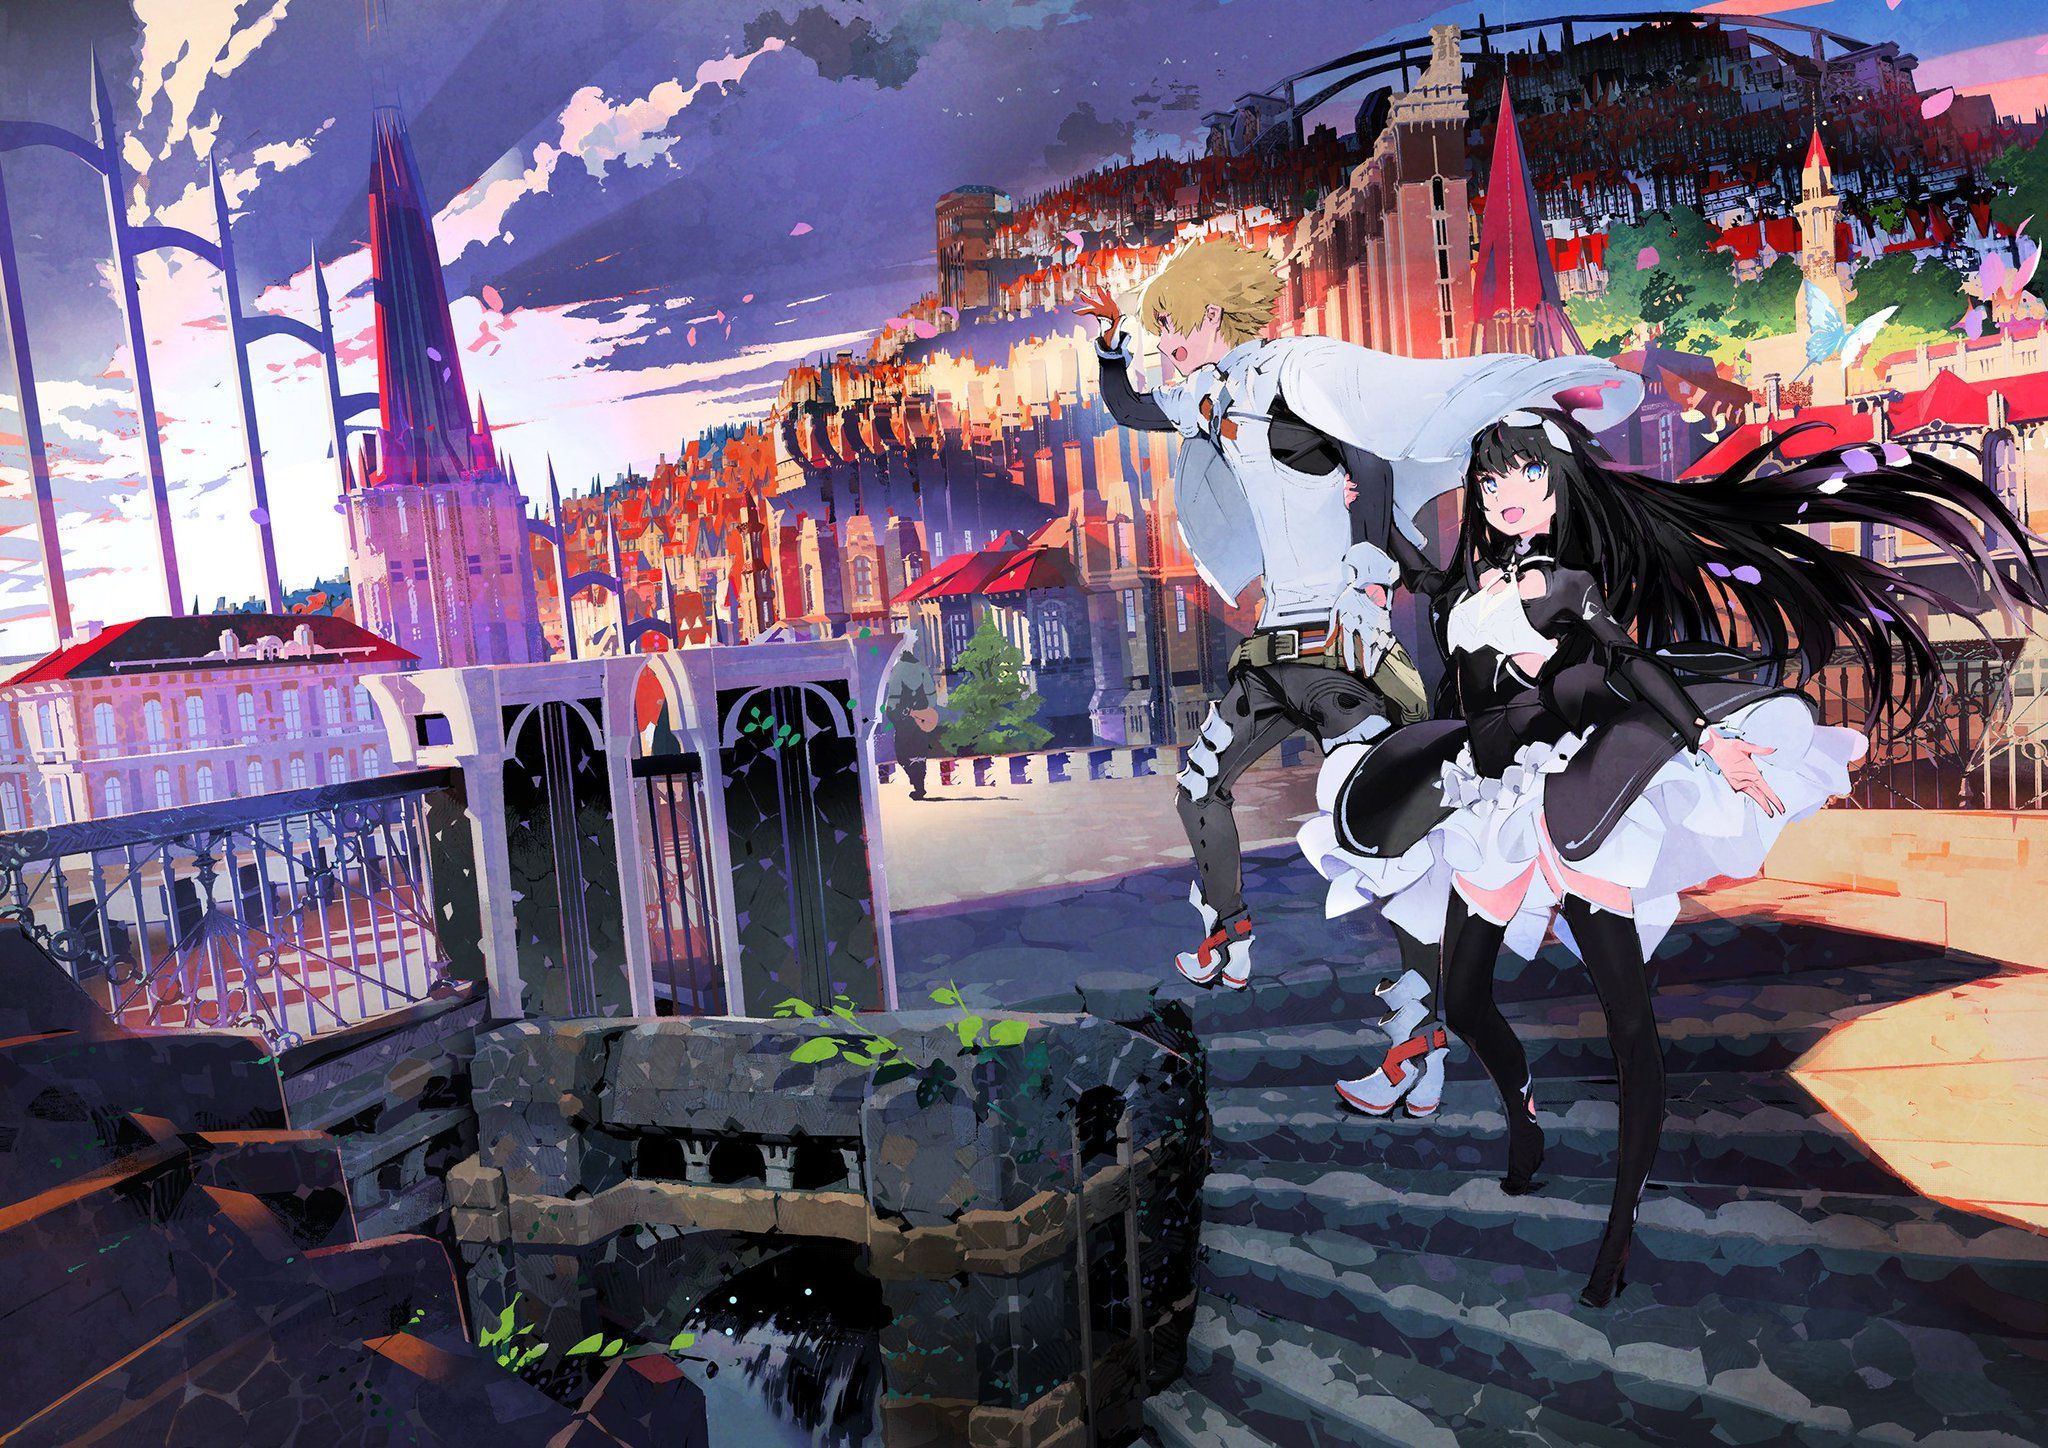 Infinite Dendrogram Anime Fabric Wall Scroll Poster (16 x 22) Inches [an]  InfiniteDendrogram- 3